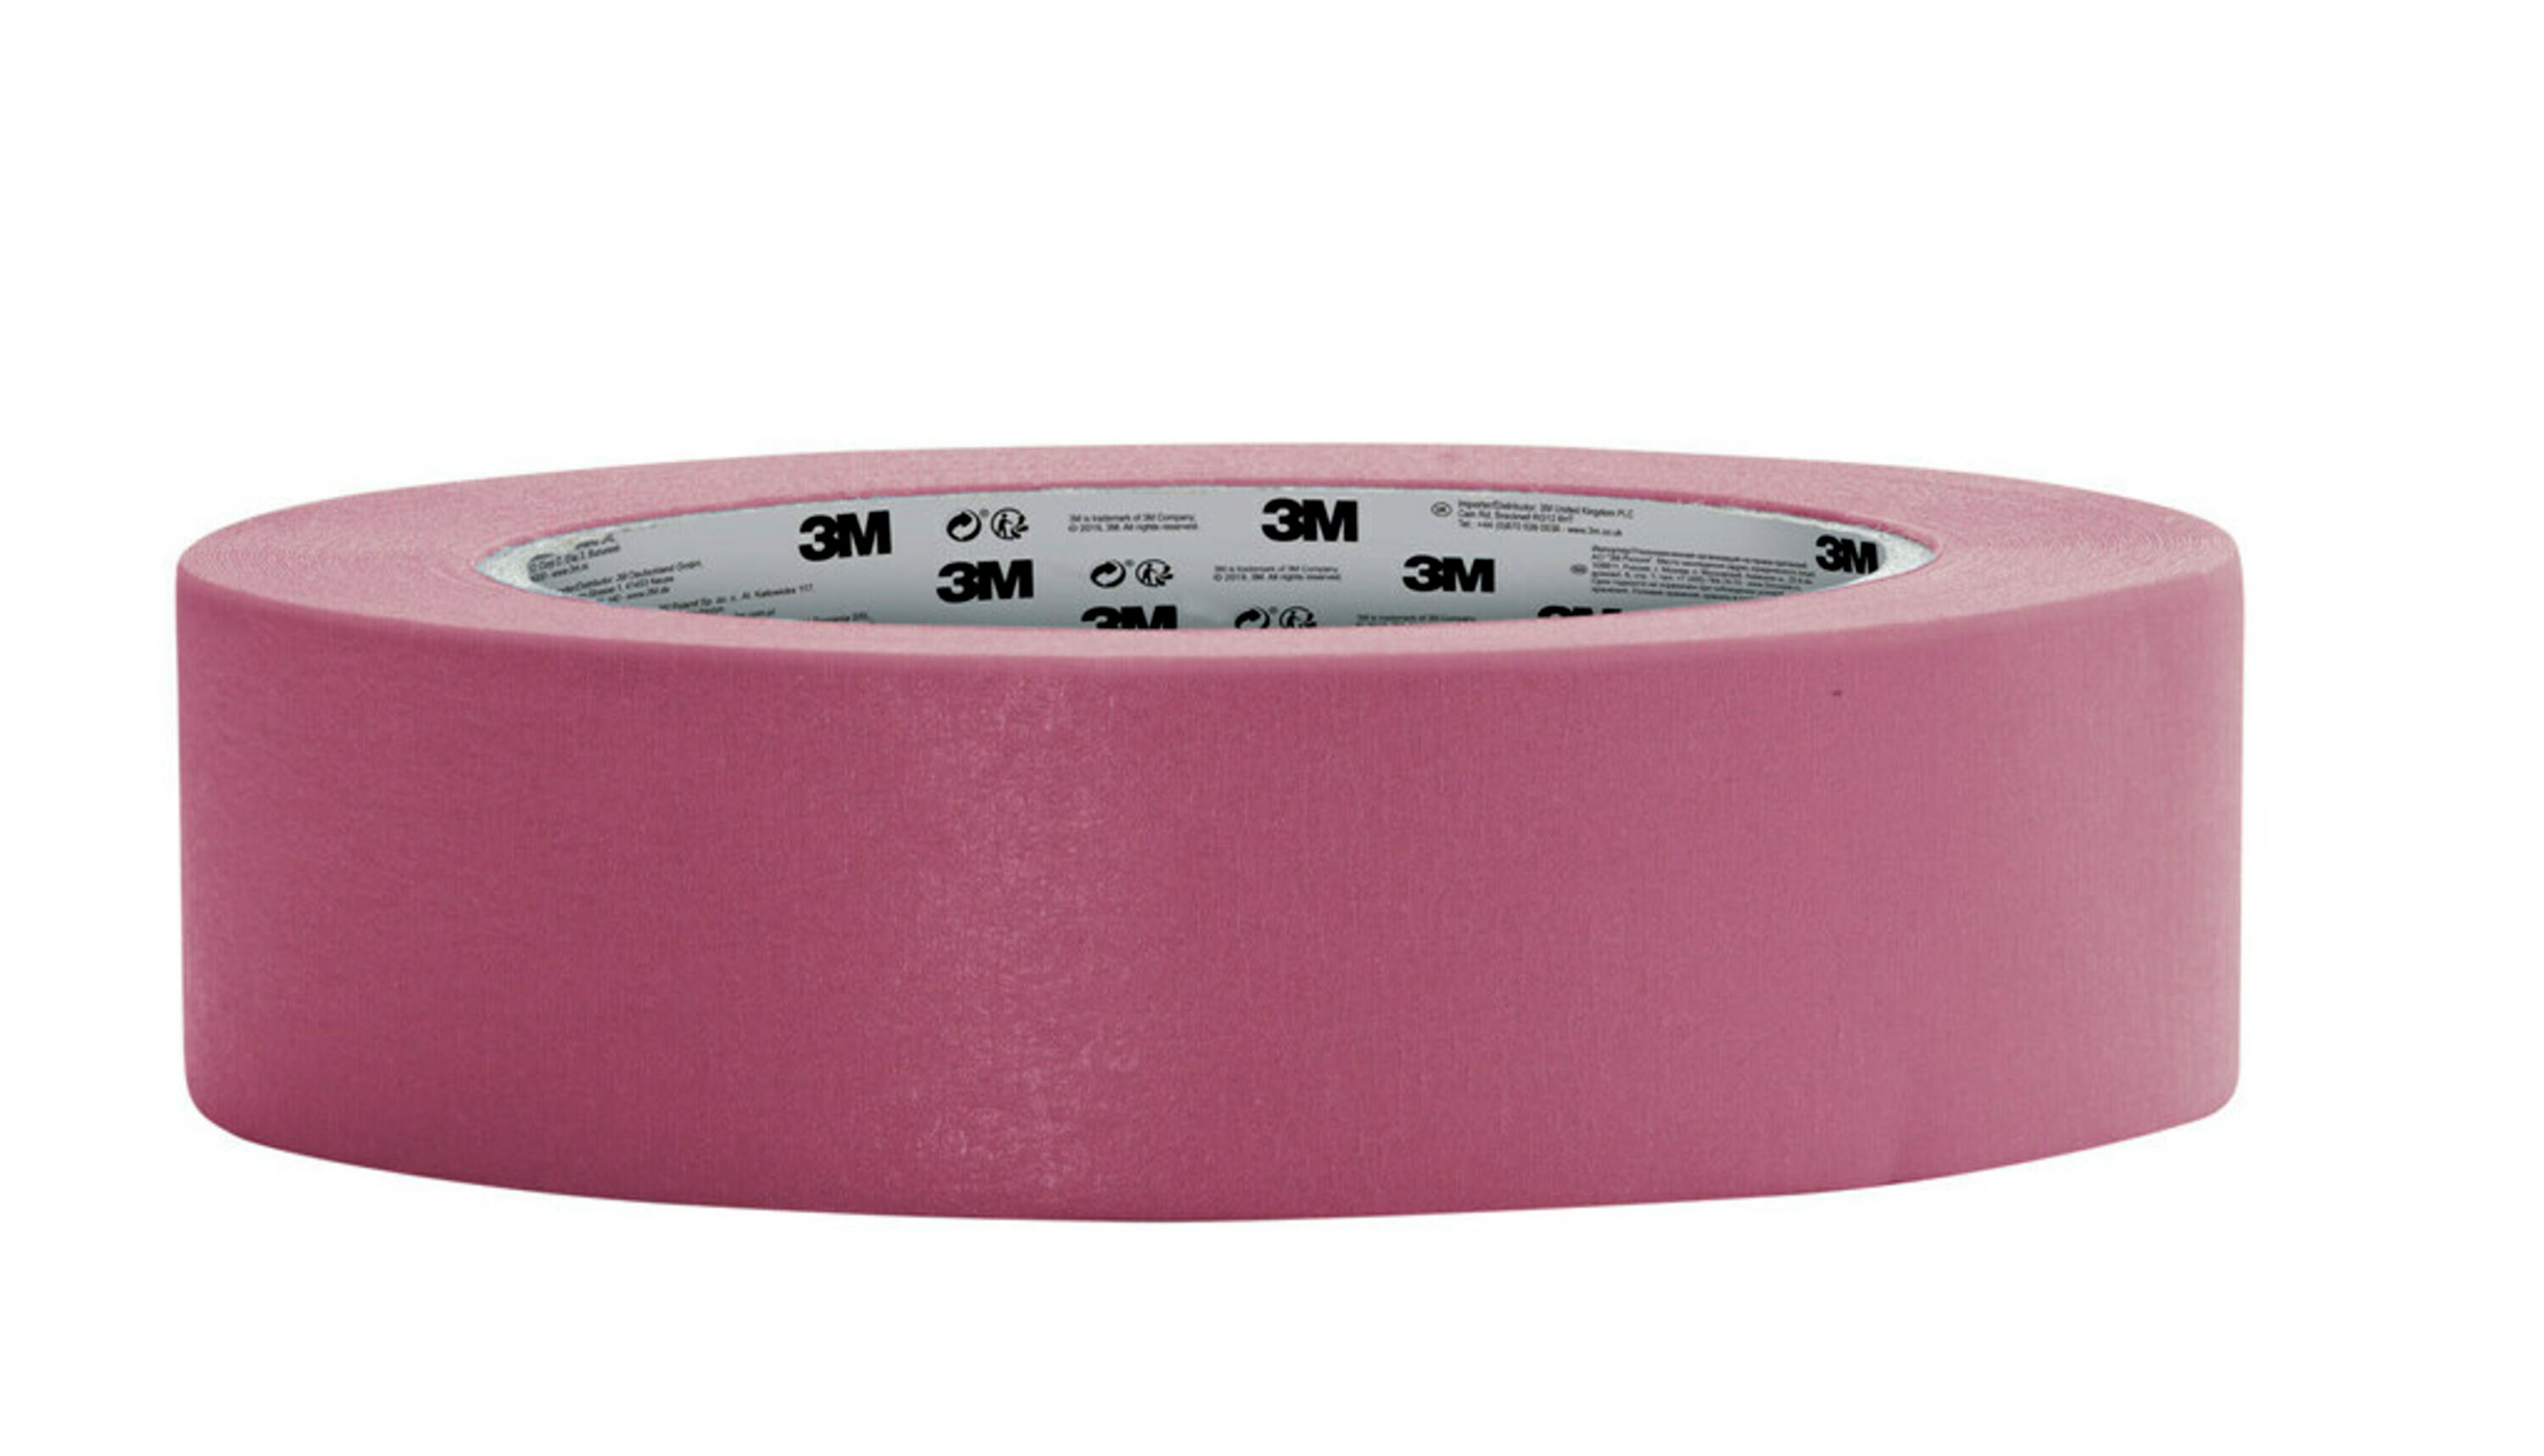 3M Painter's masking tape 2072 for particularly sensitive surfaces, pink, 24 mm x 50 m